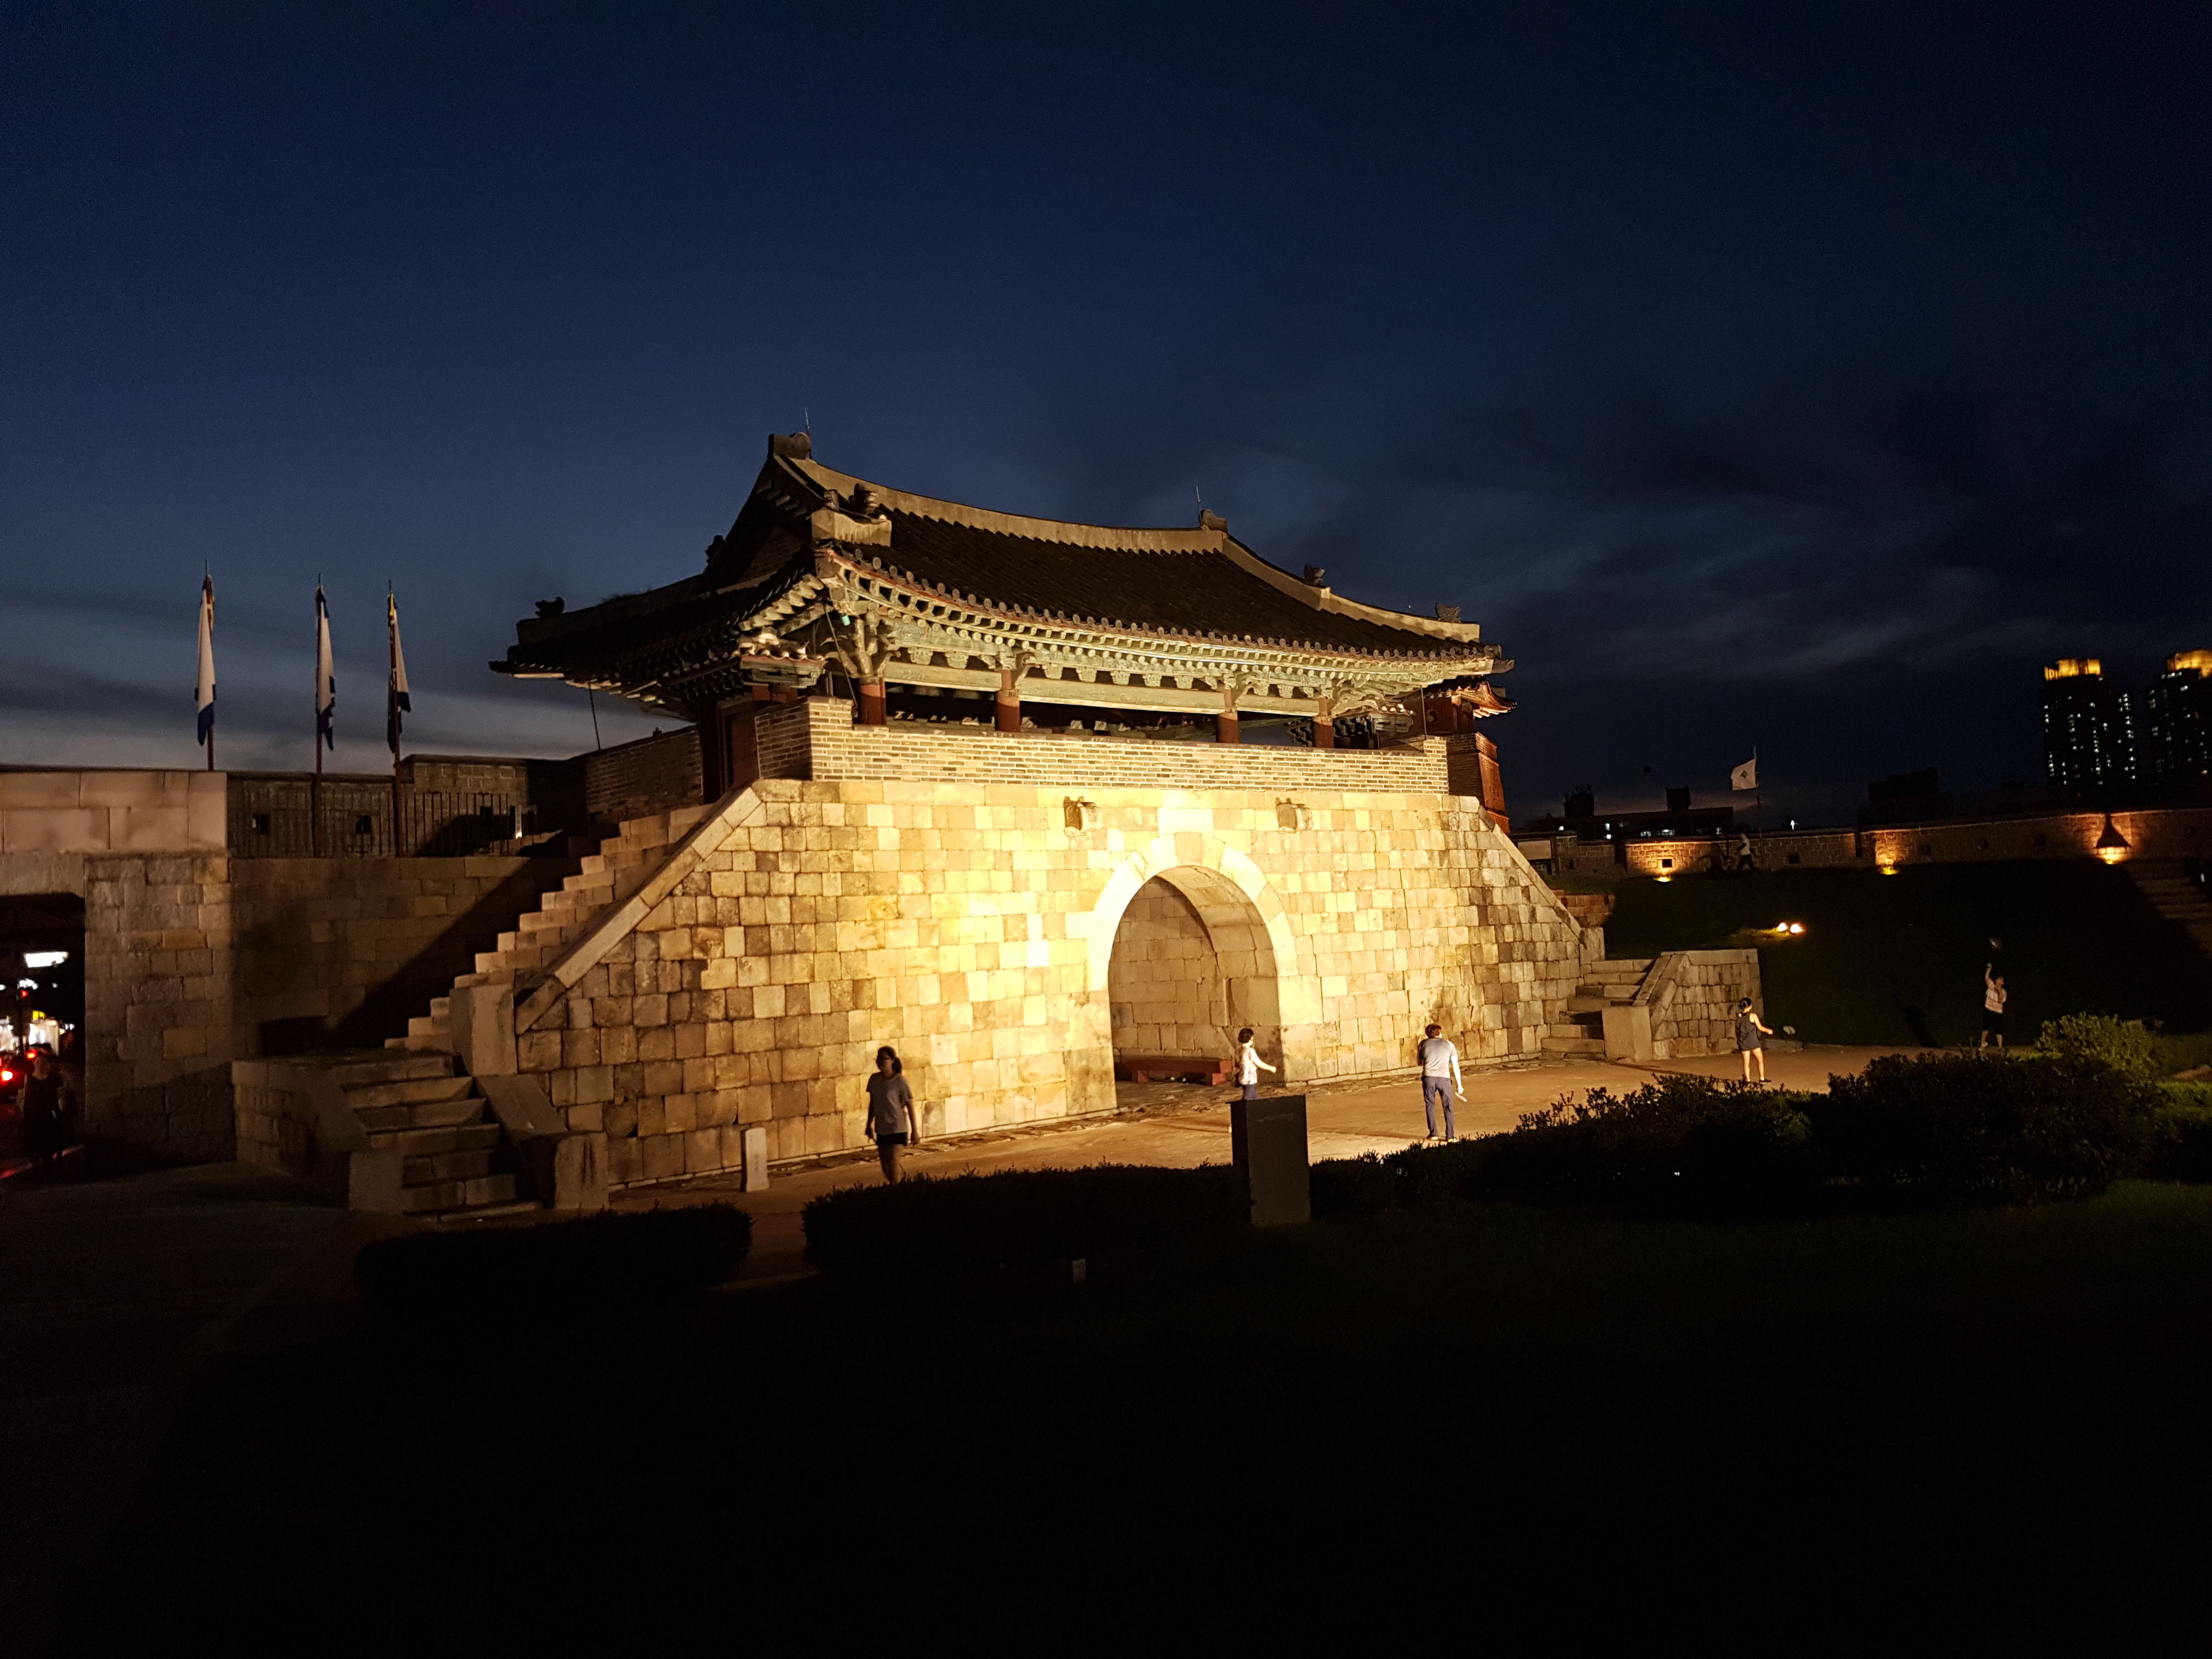 Hwaseon Fortress